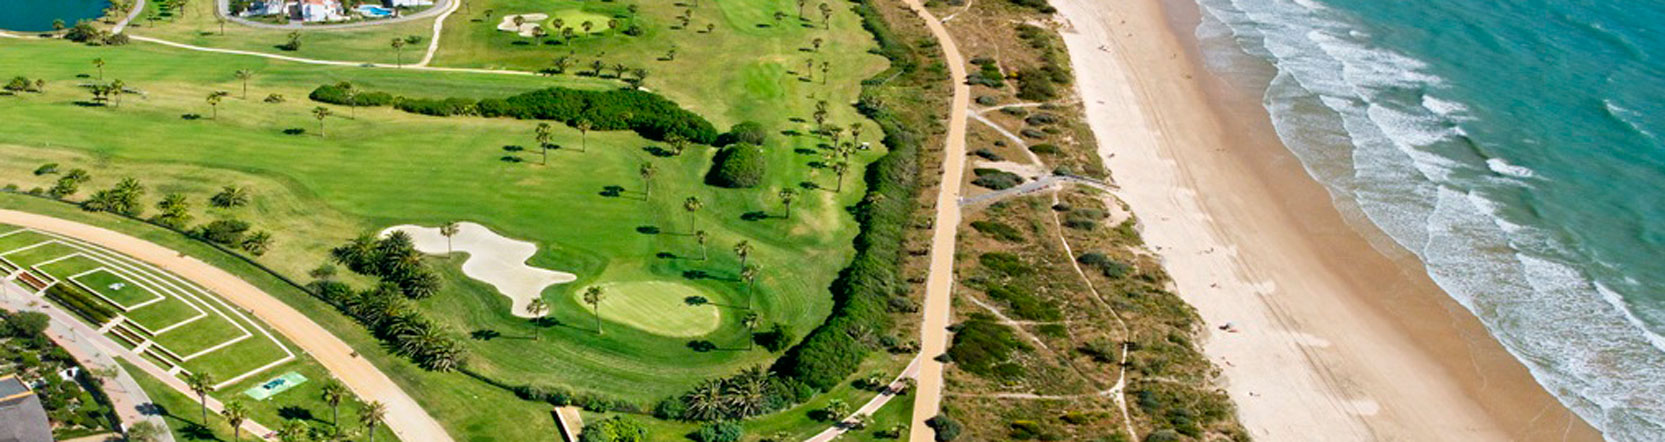 Aerial view of Costa Ballena Golf showing its proximity to the beach